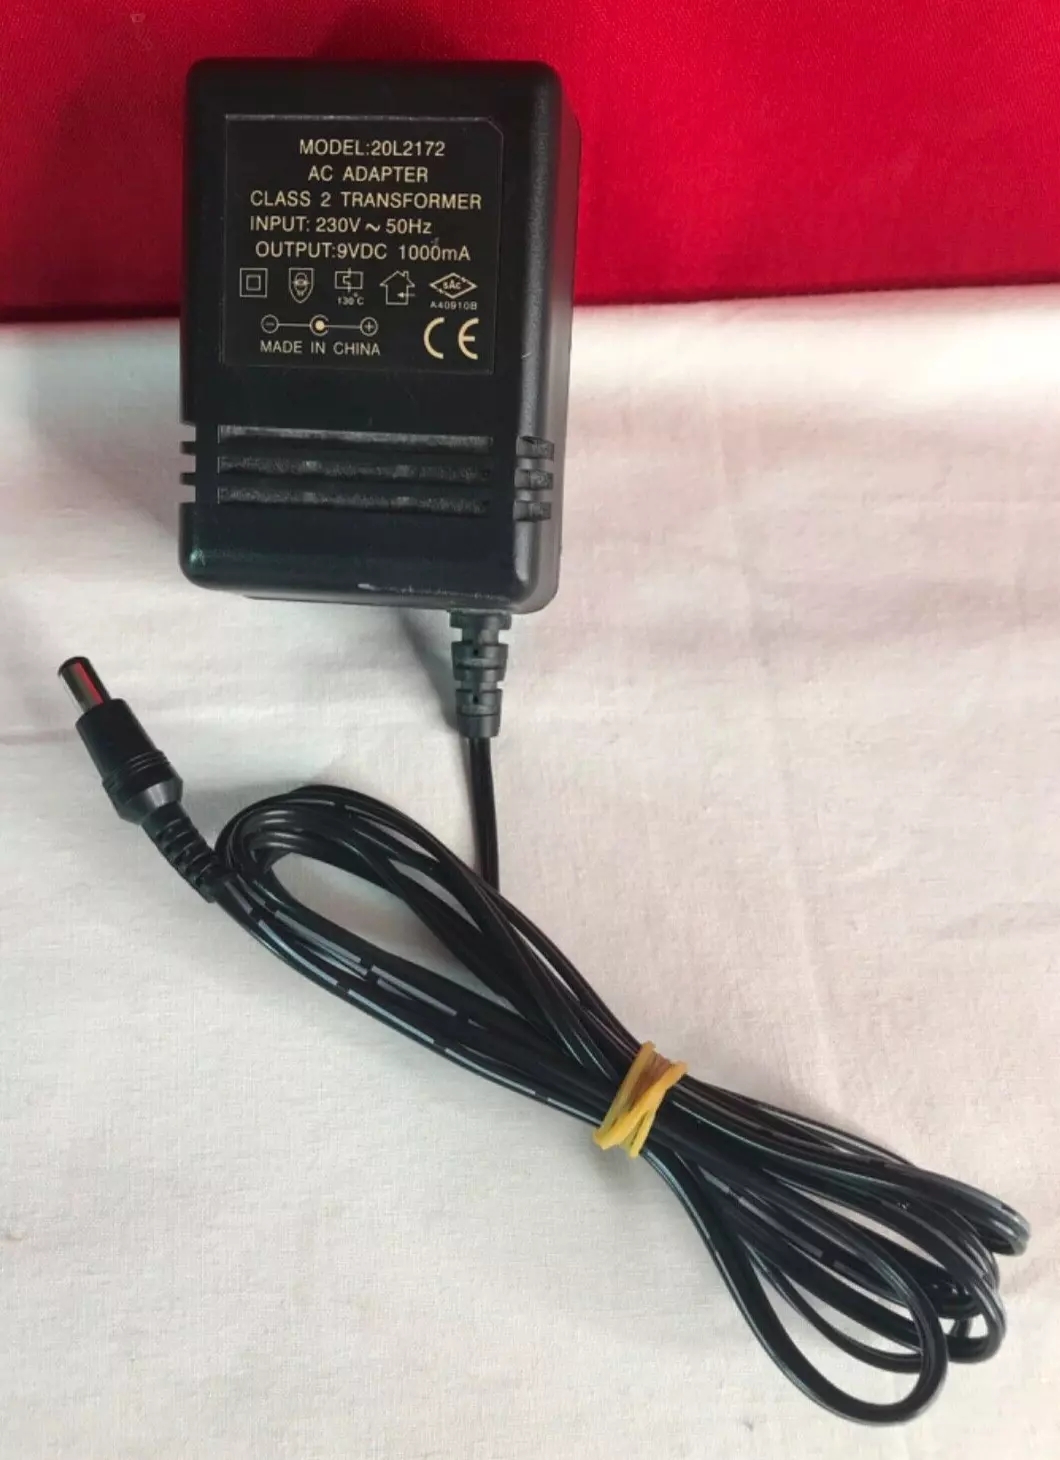 *Brand NEW*CLASS 2 TRANSFOMER OUTPUT: 9VDC 1000mA AC ADAPTER MODEL: 20L2172 GOOD CONDITION Power Supply